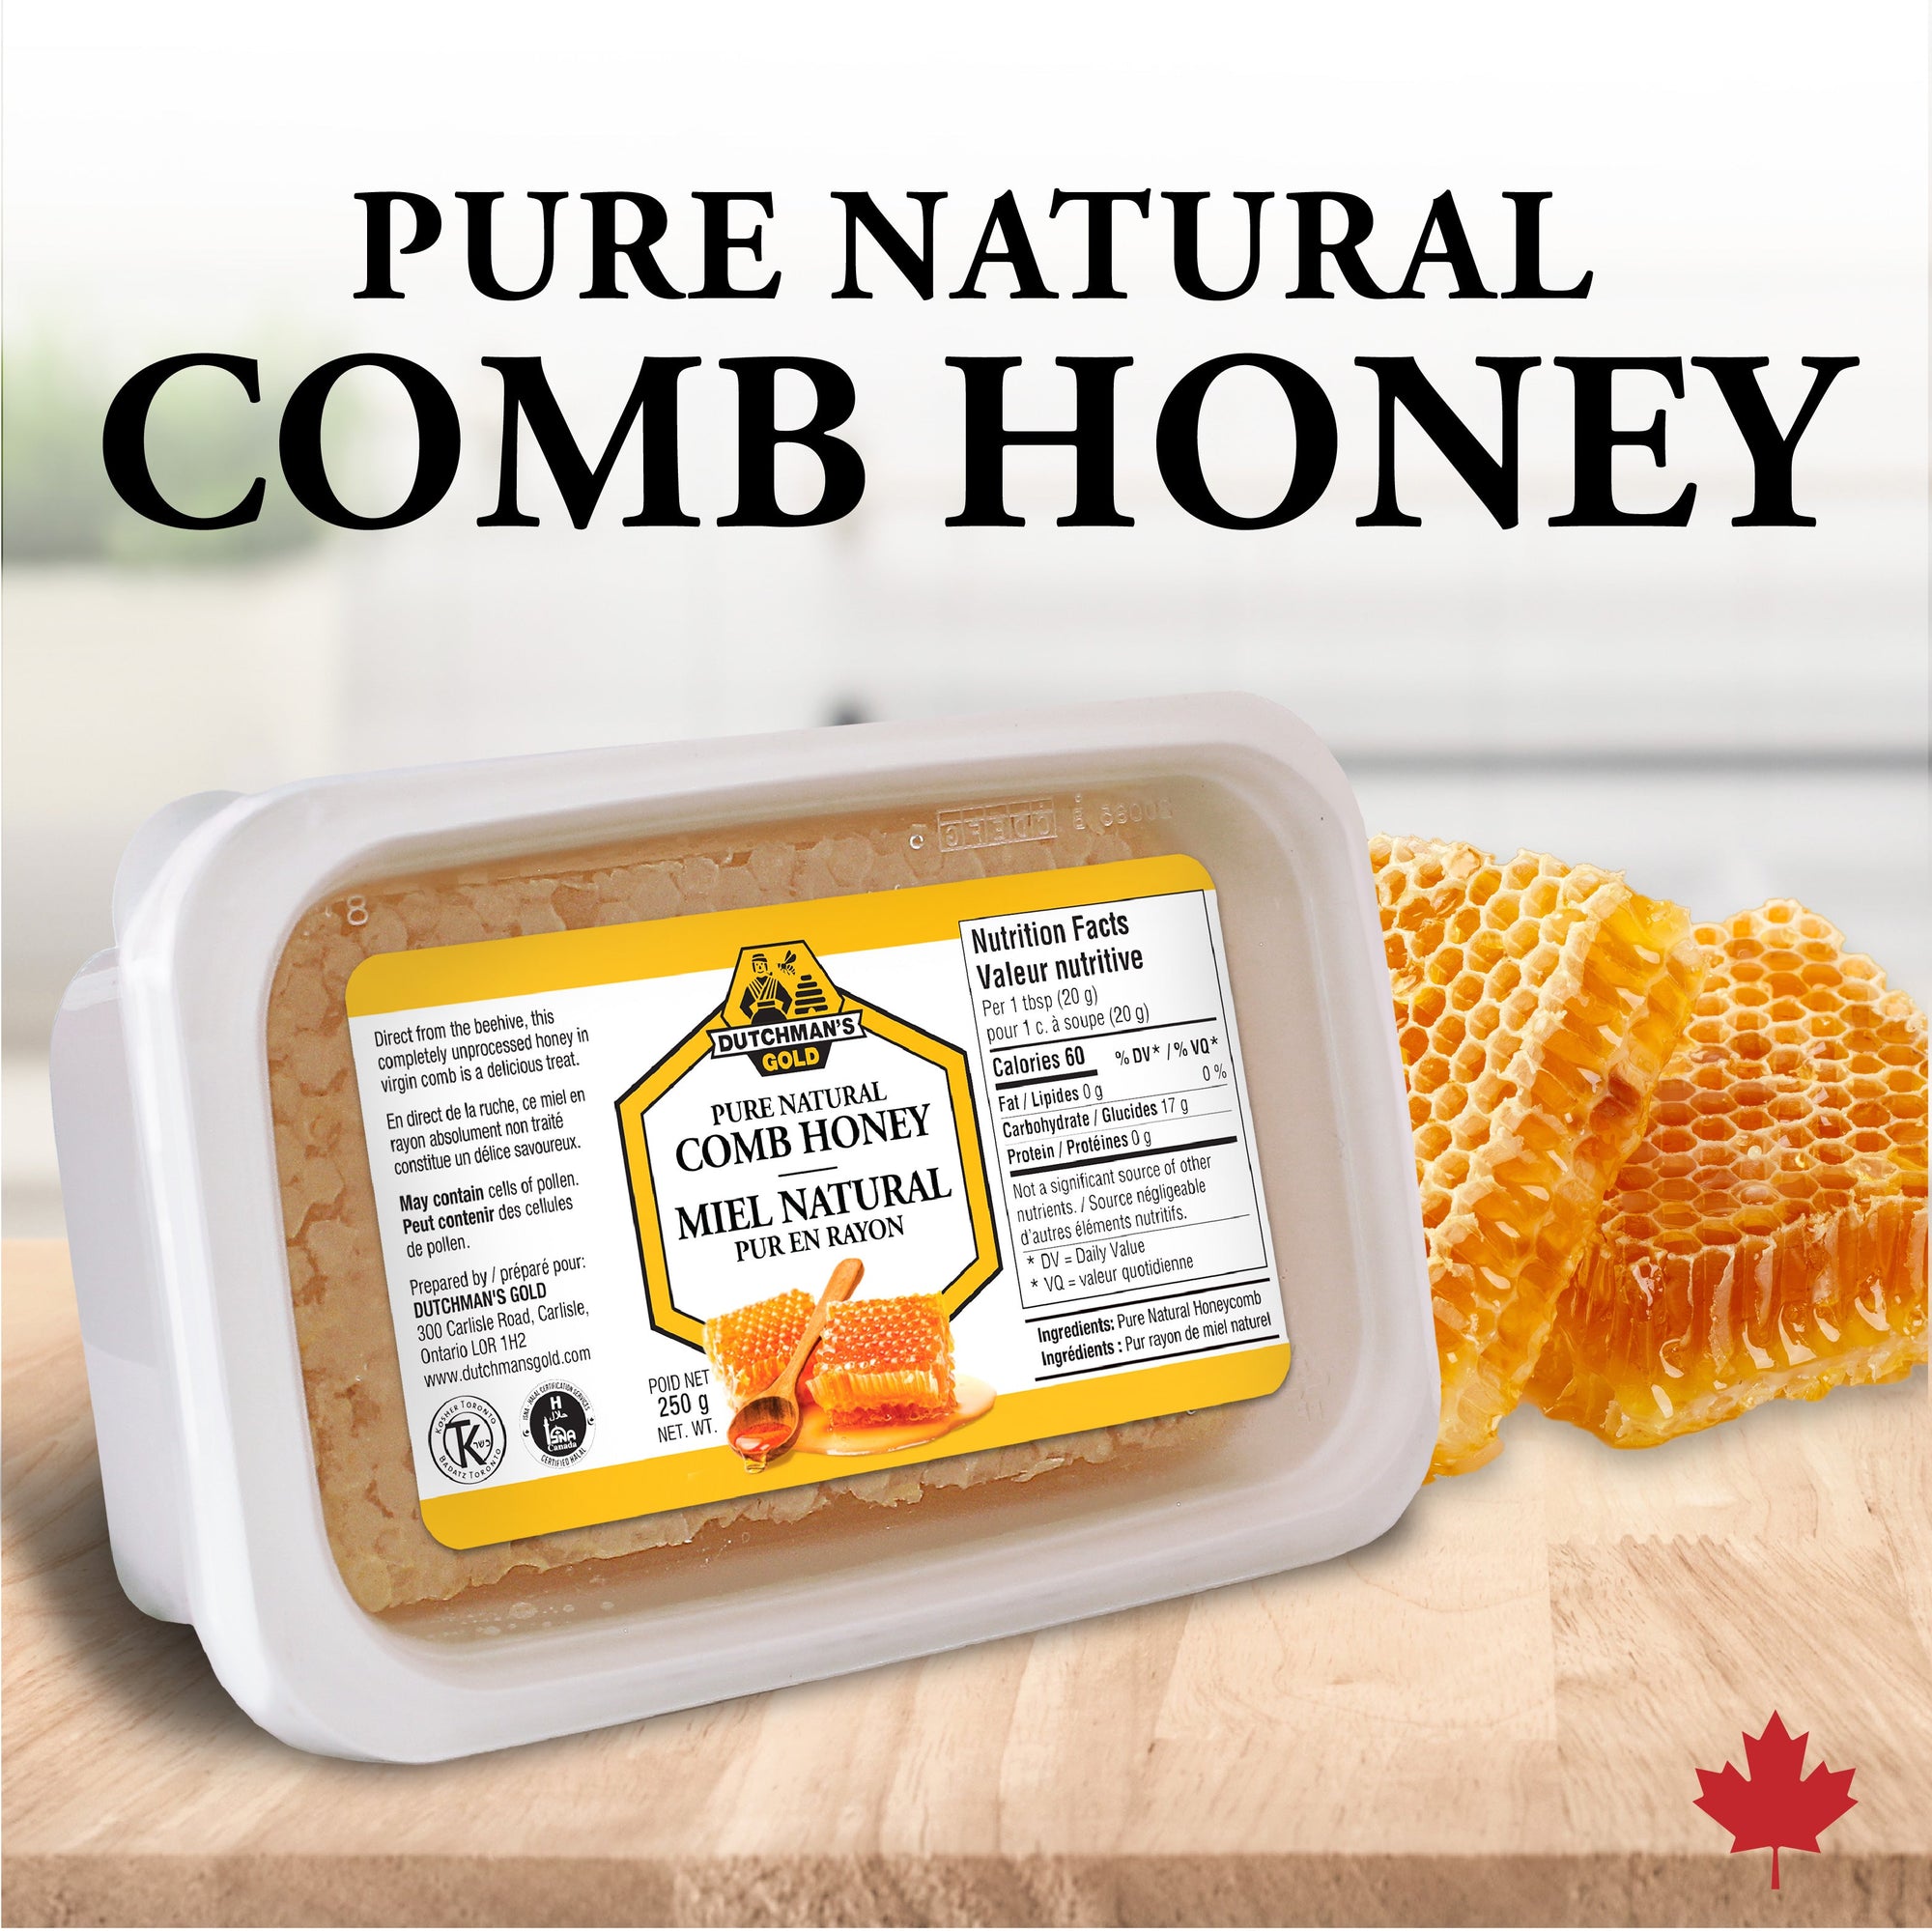  CHESHNI Premium Natural Honeycomb, 100% Pure Gourmet Honey Comb  From the Turkish Mountains - 16 Oz (Ships in Gift Box) : Grocery & Gourmet  Food